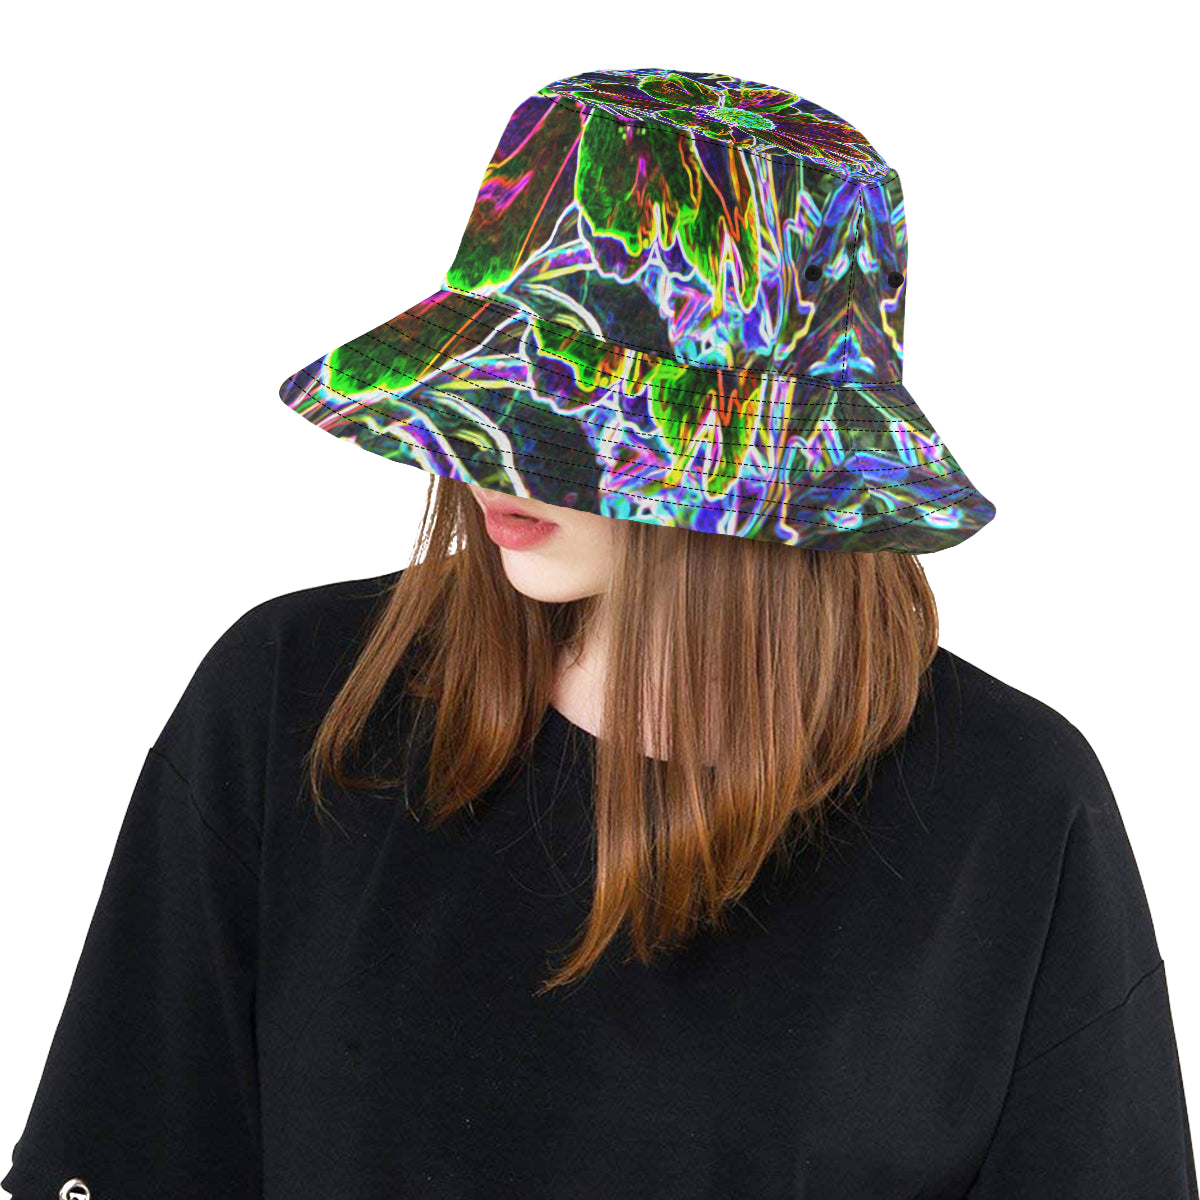 Bucket Hats, Abstract Garden Peony in Black and Blue